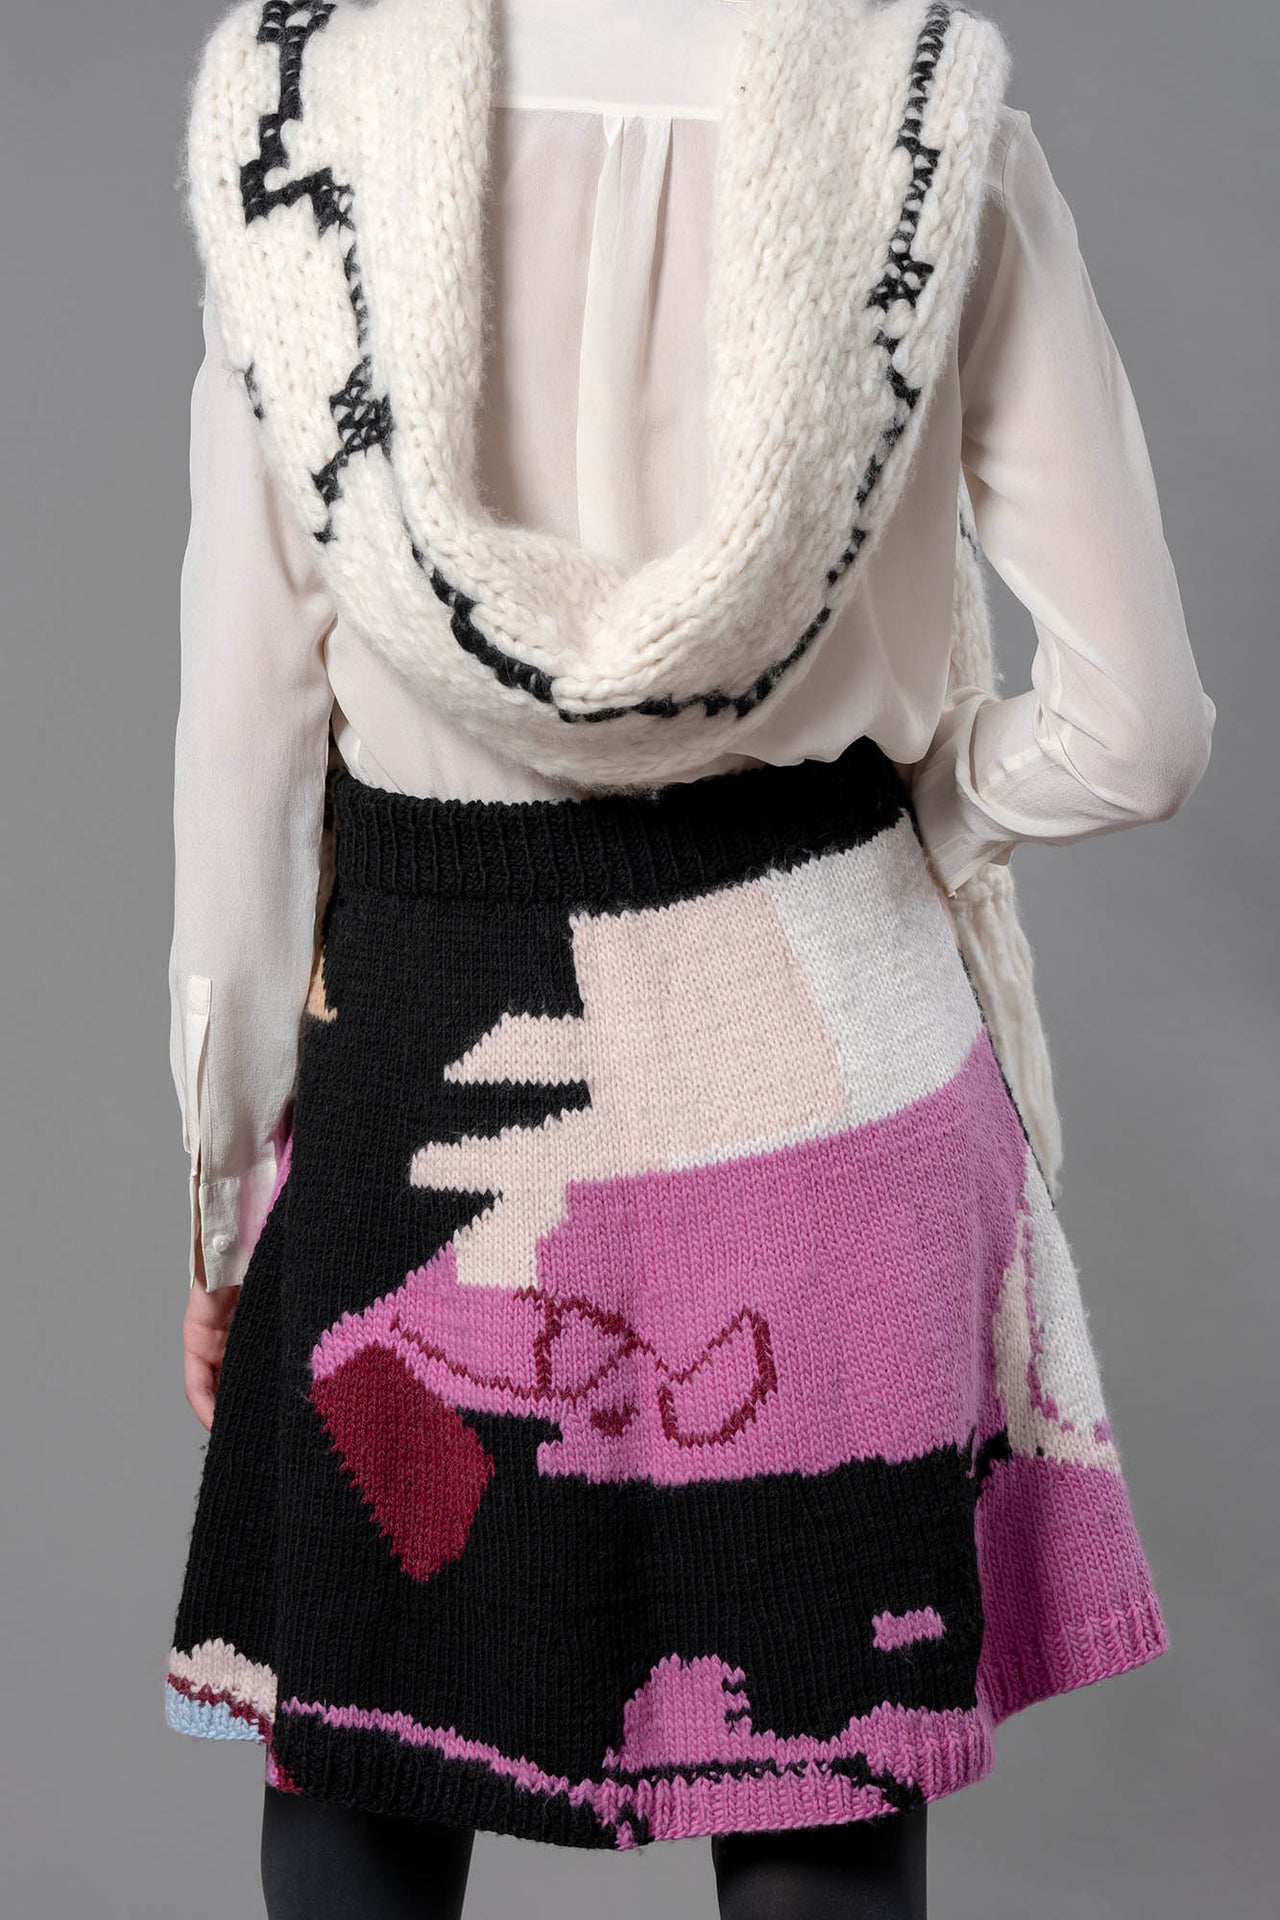 Back of woman wearing wool skirt and black and white wool scarf. The skirt has abstract colour block patterns in fuchsia, black, white, beige and a touch of burgundy.